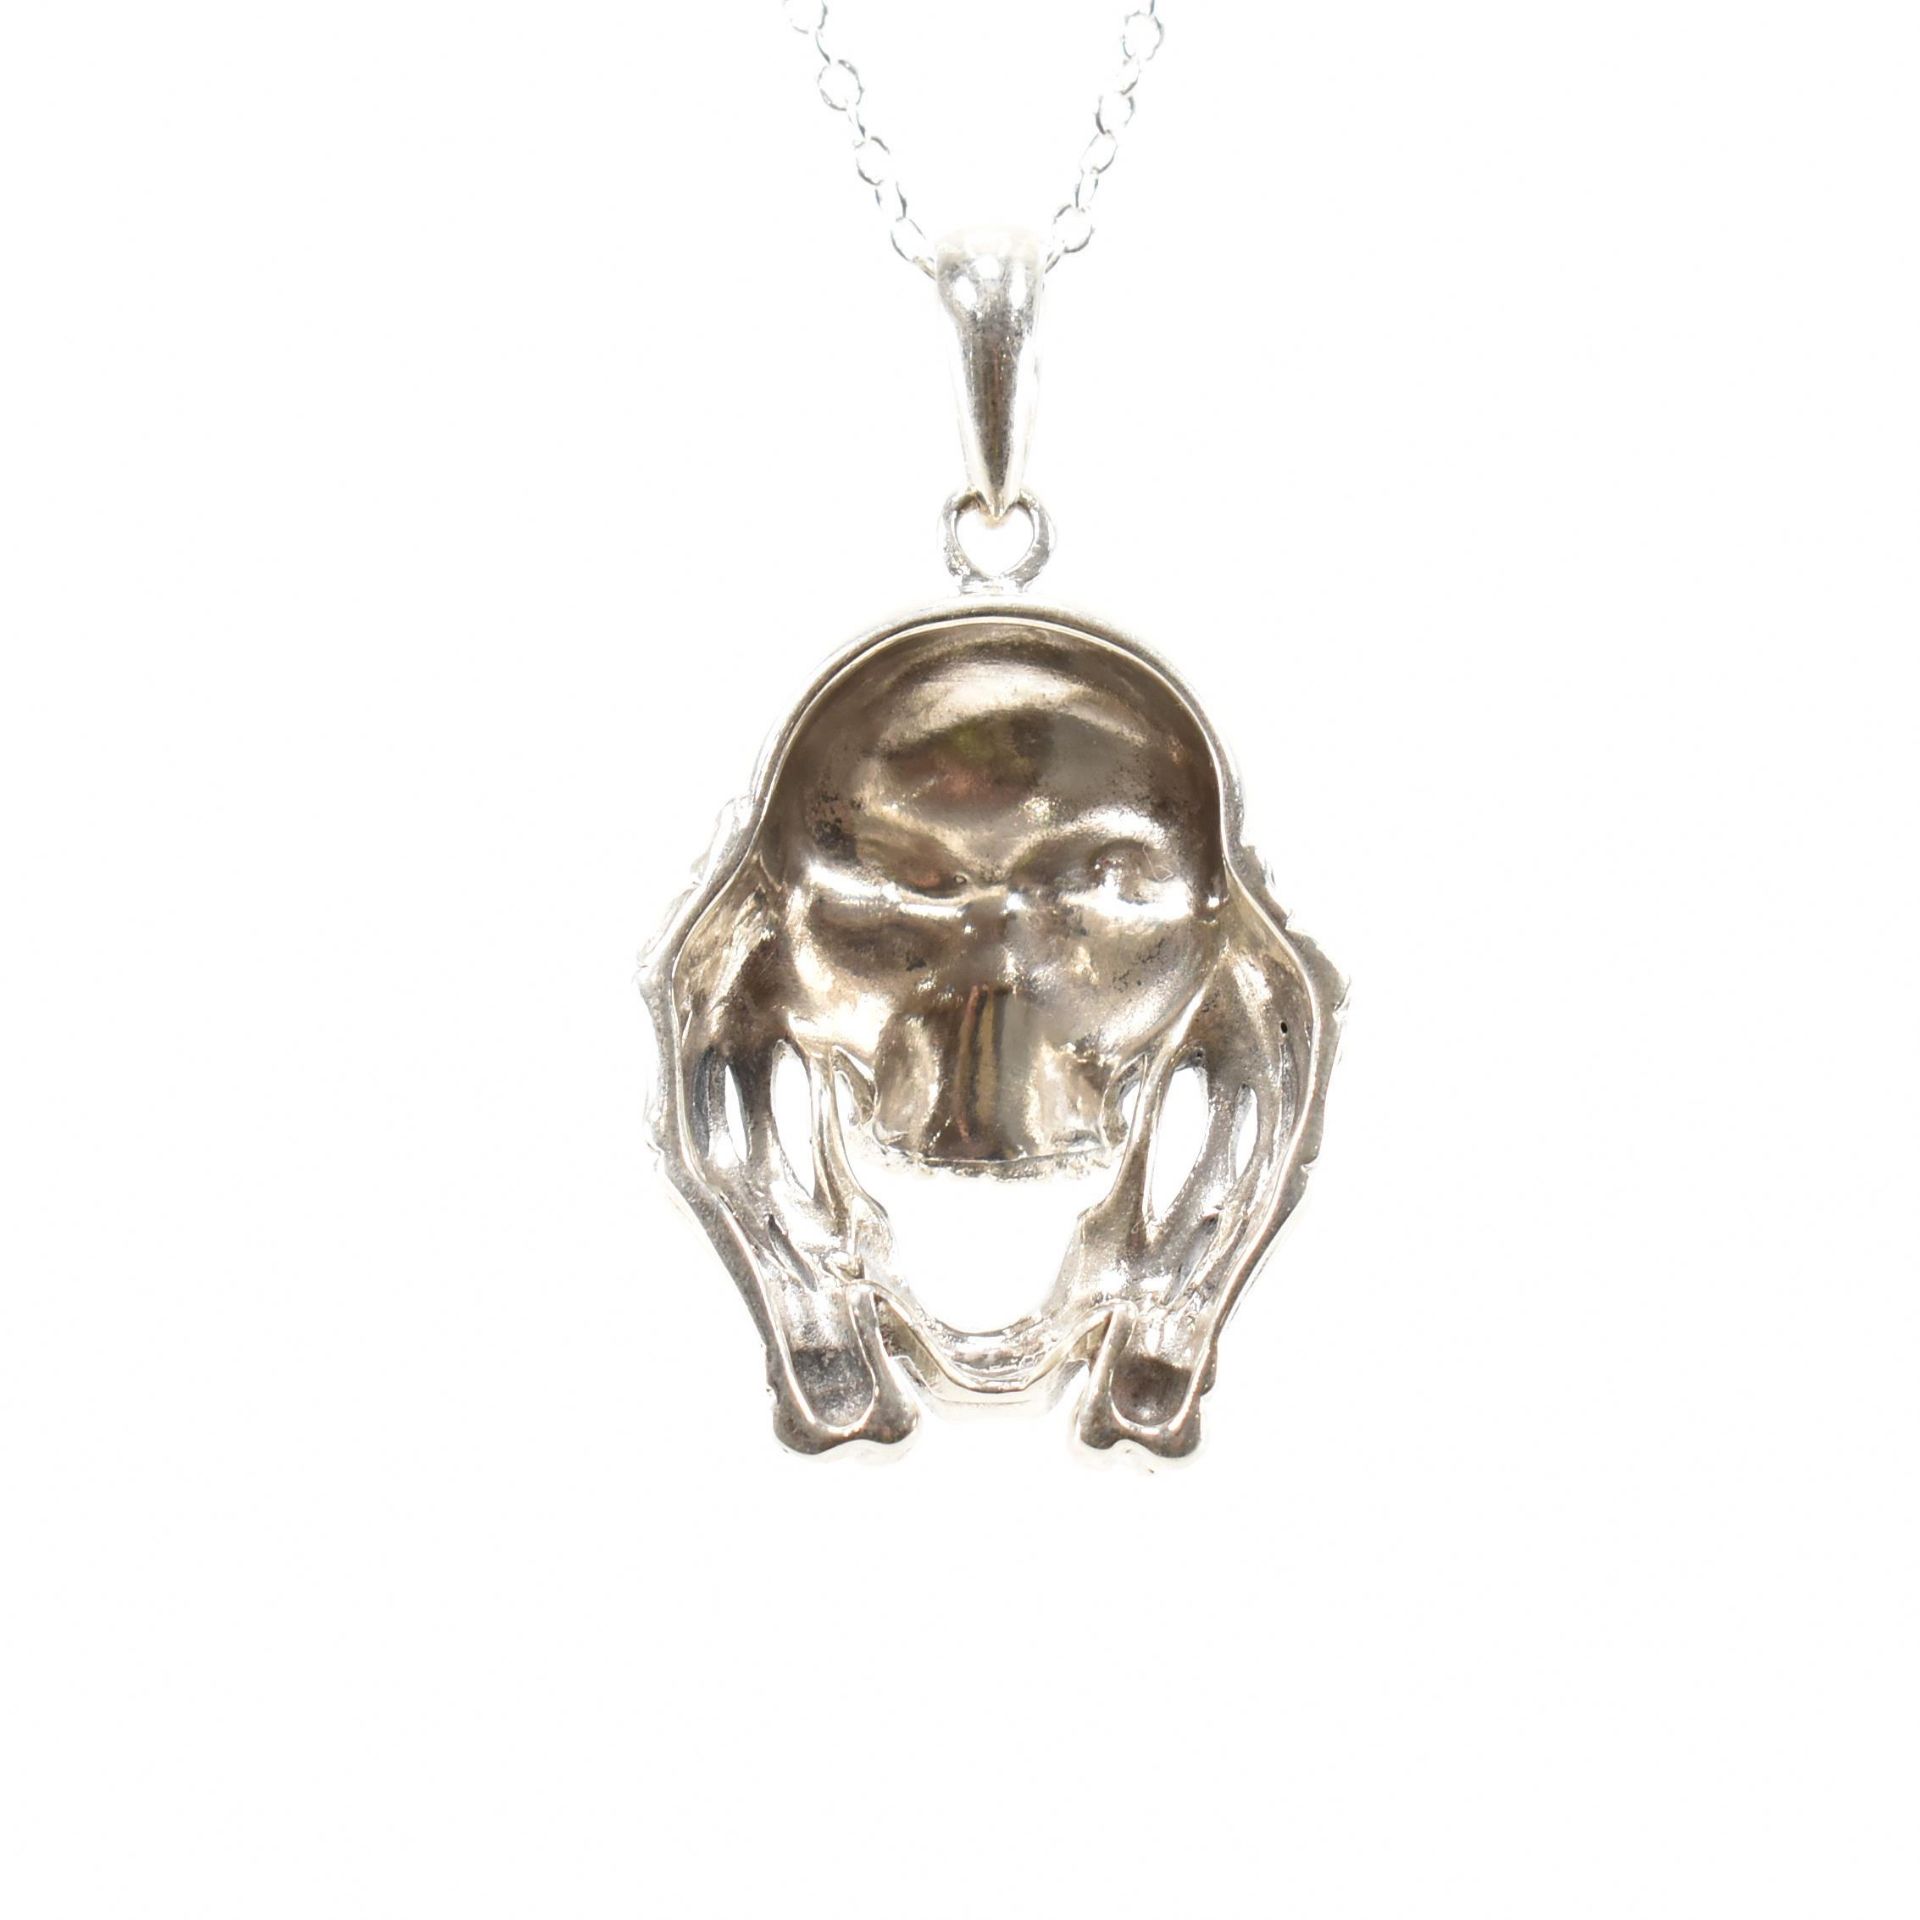 STERLING SILVER & RUBY SKULL NECKLACE PENDANT & CHAIN - Image 3 of 4